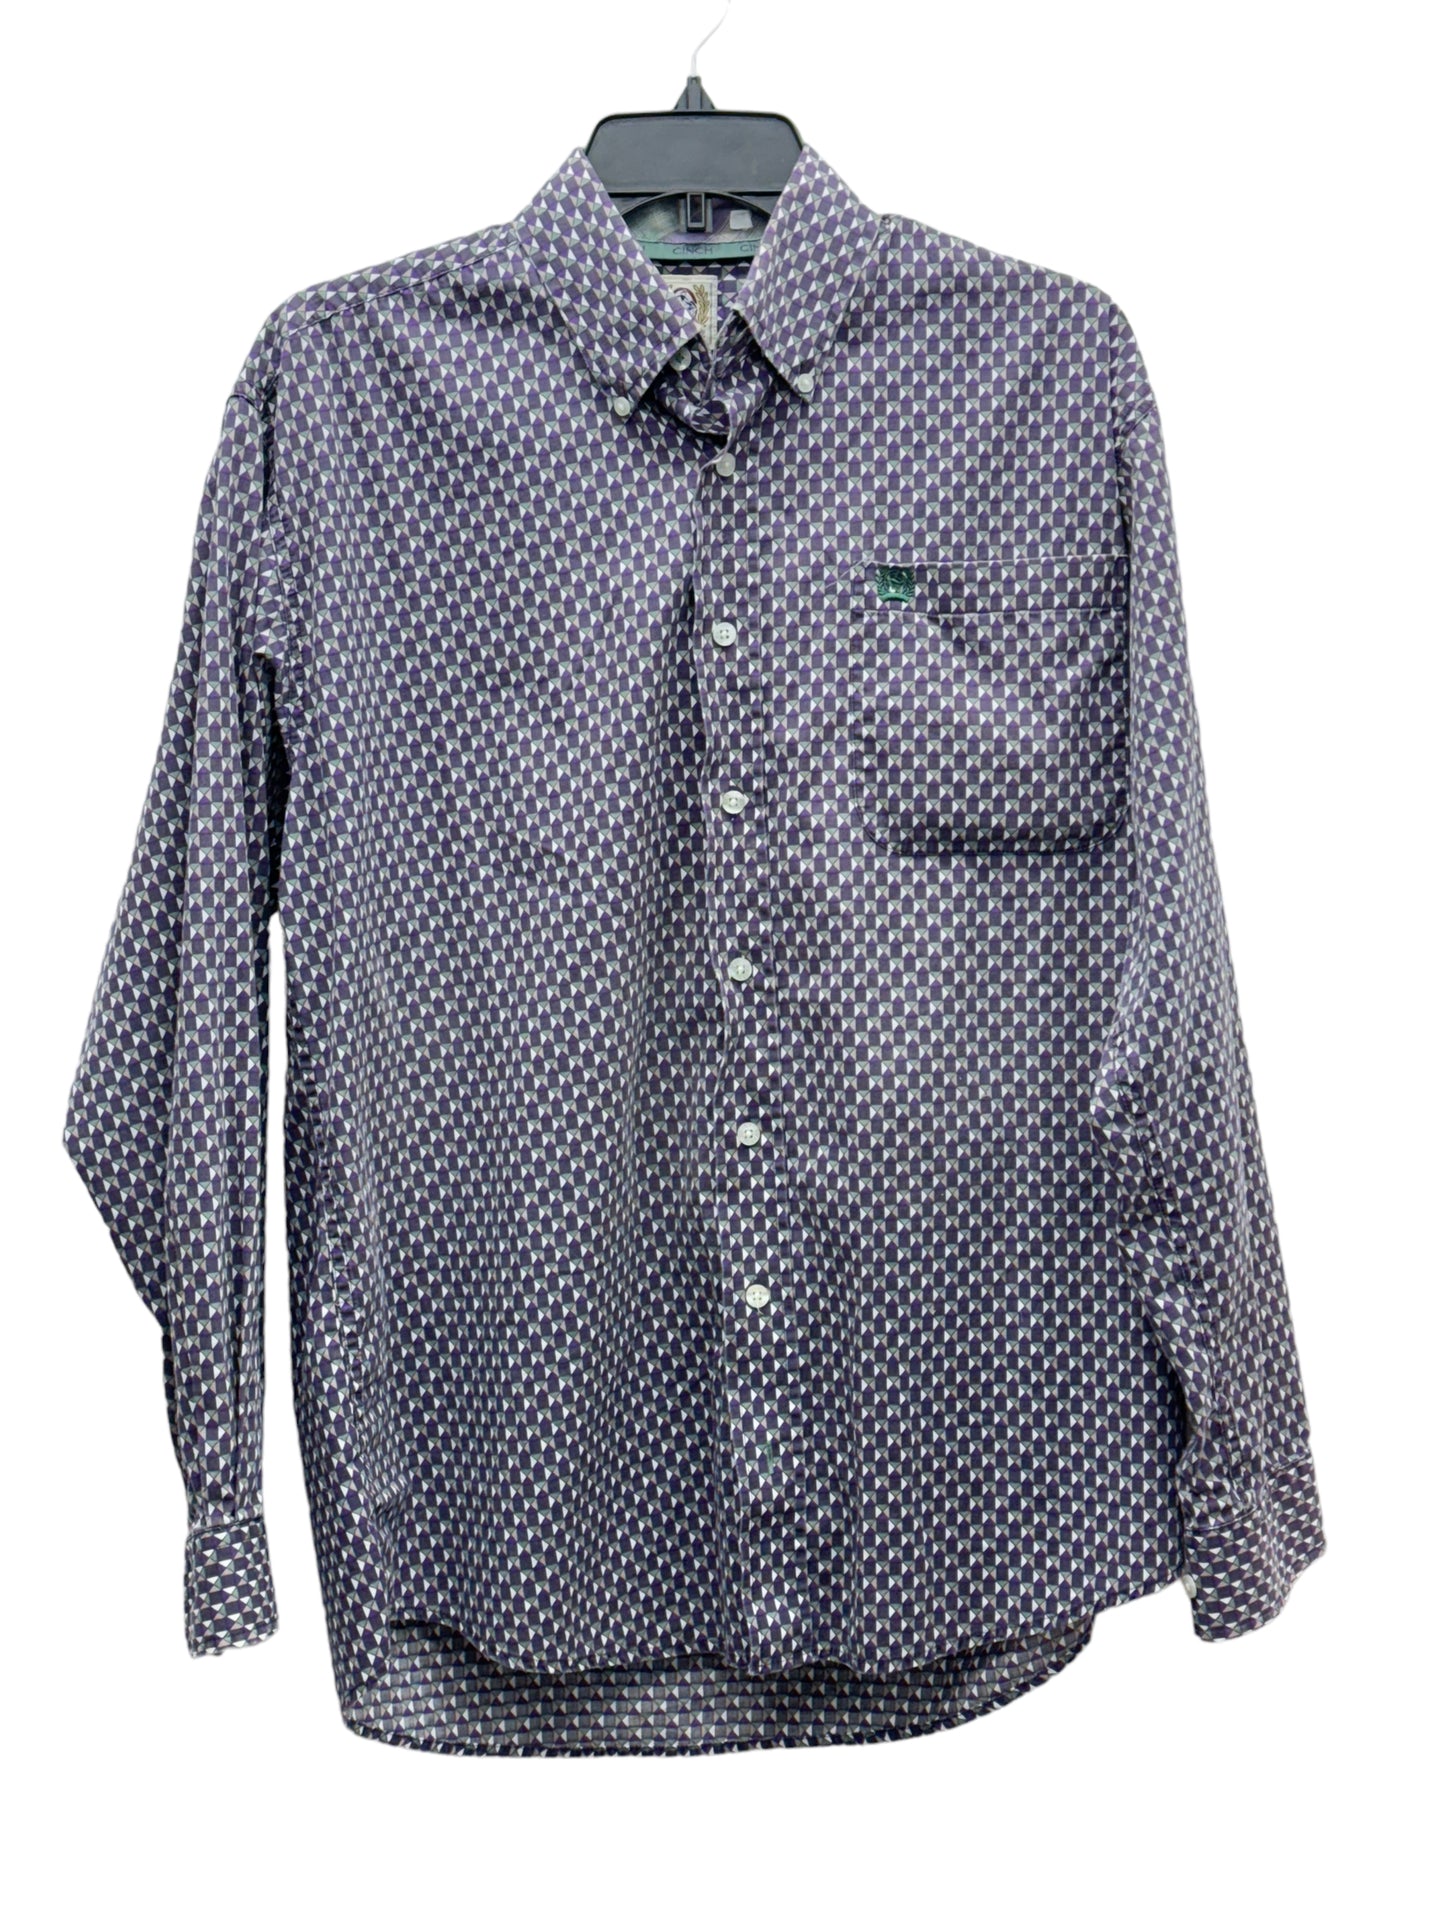 Cinch Printed Cotton Long Sleeve Button Up Western Men's Shirt - Size S